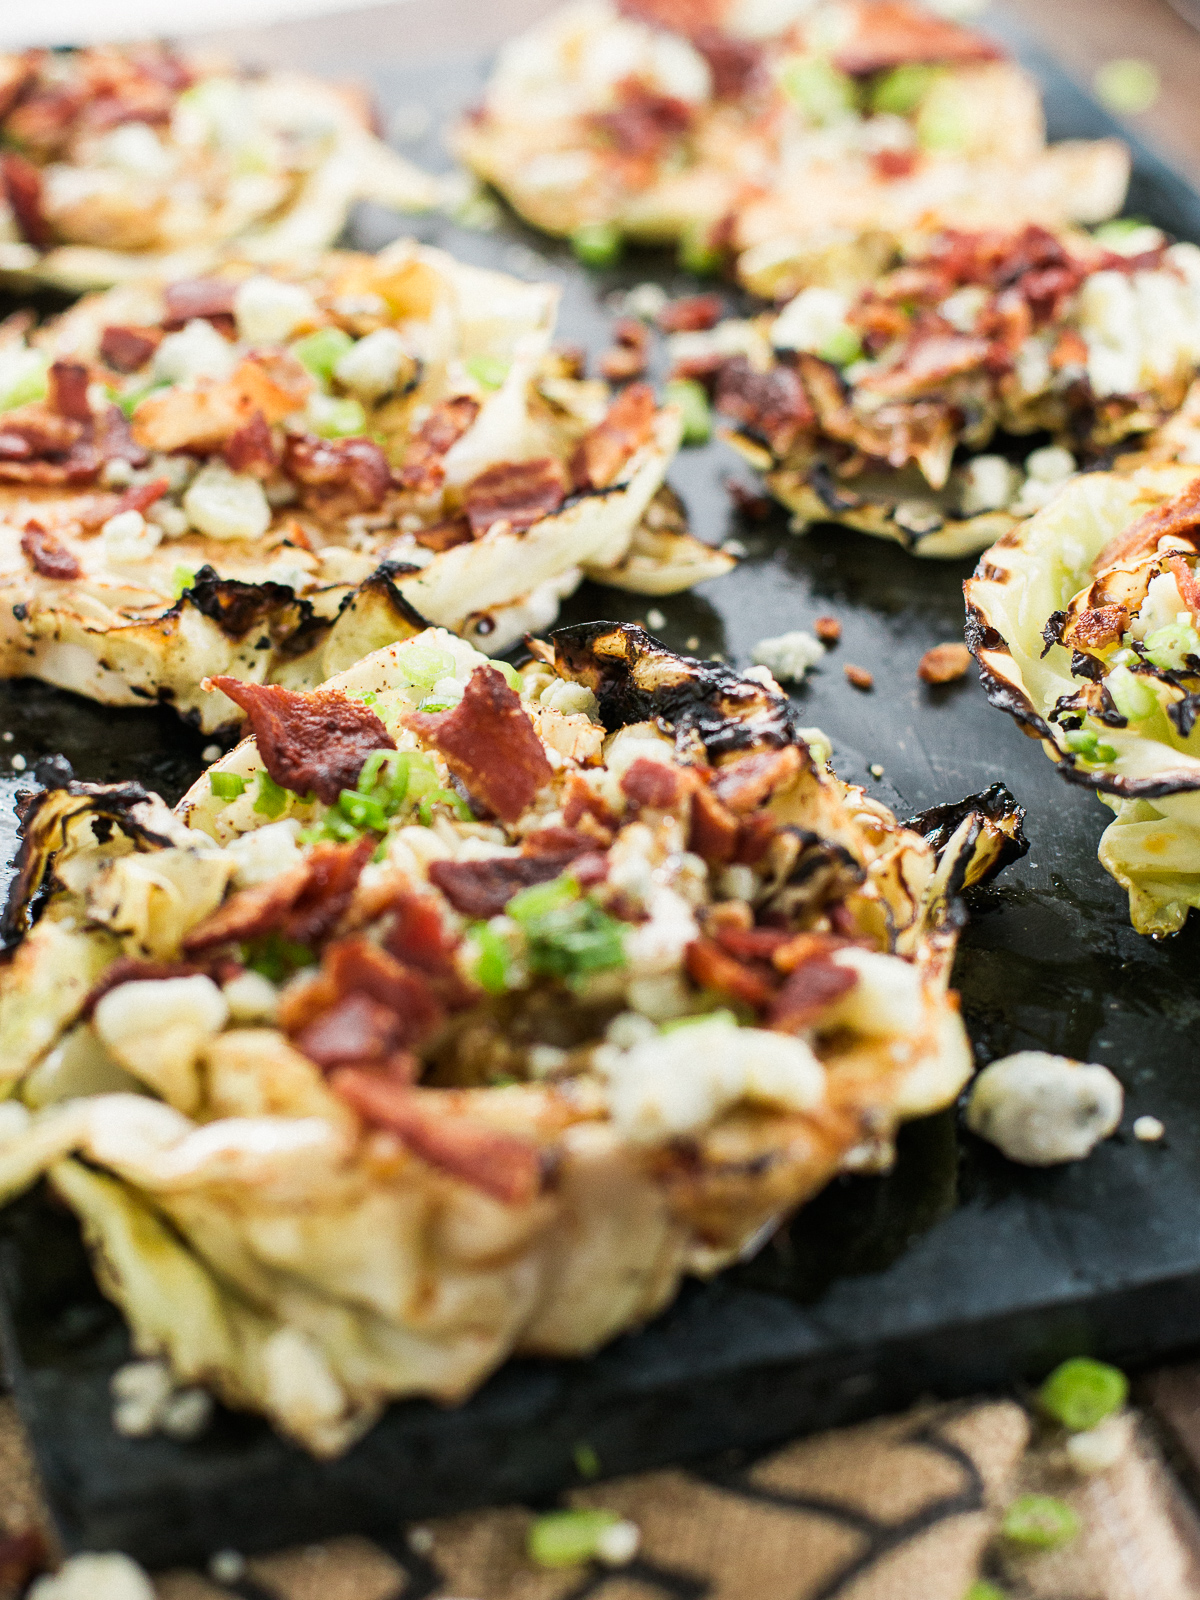 Grilled Cabbage Steaks With Bacon & Blue Cheese